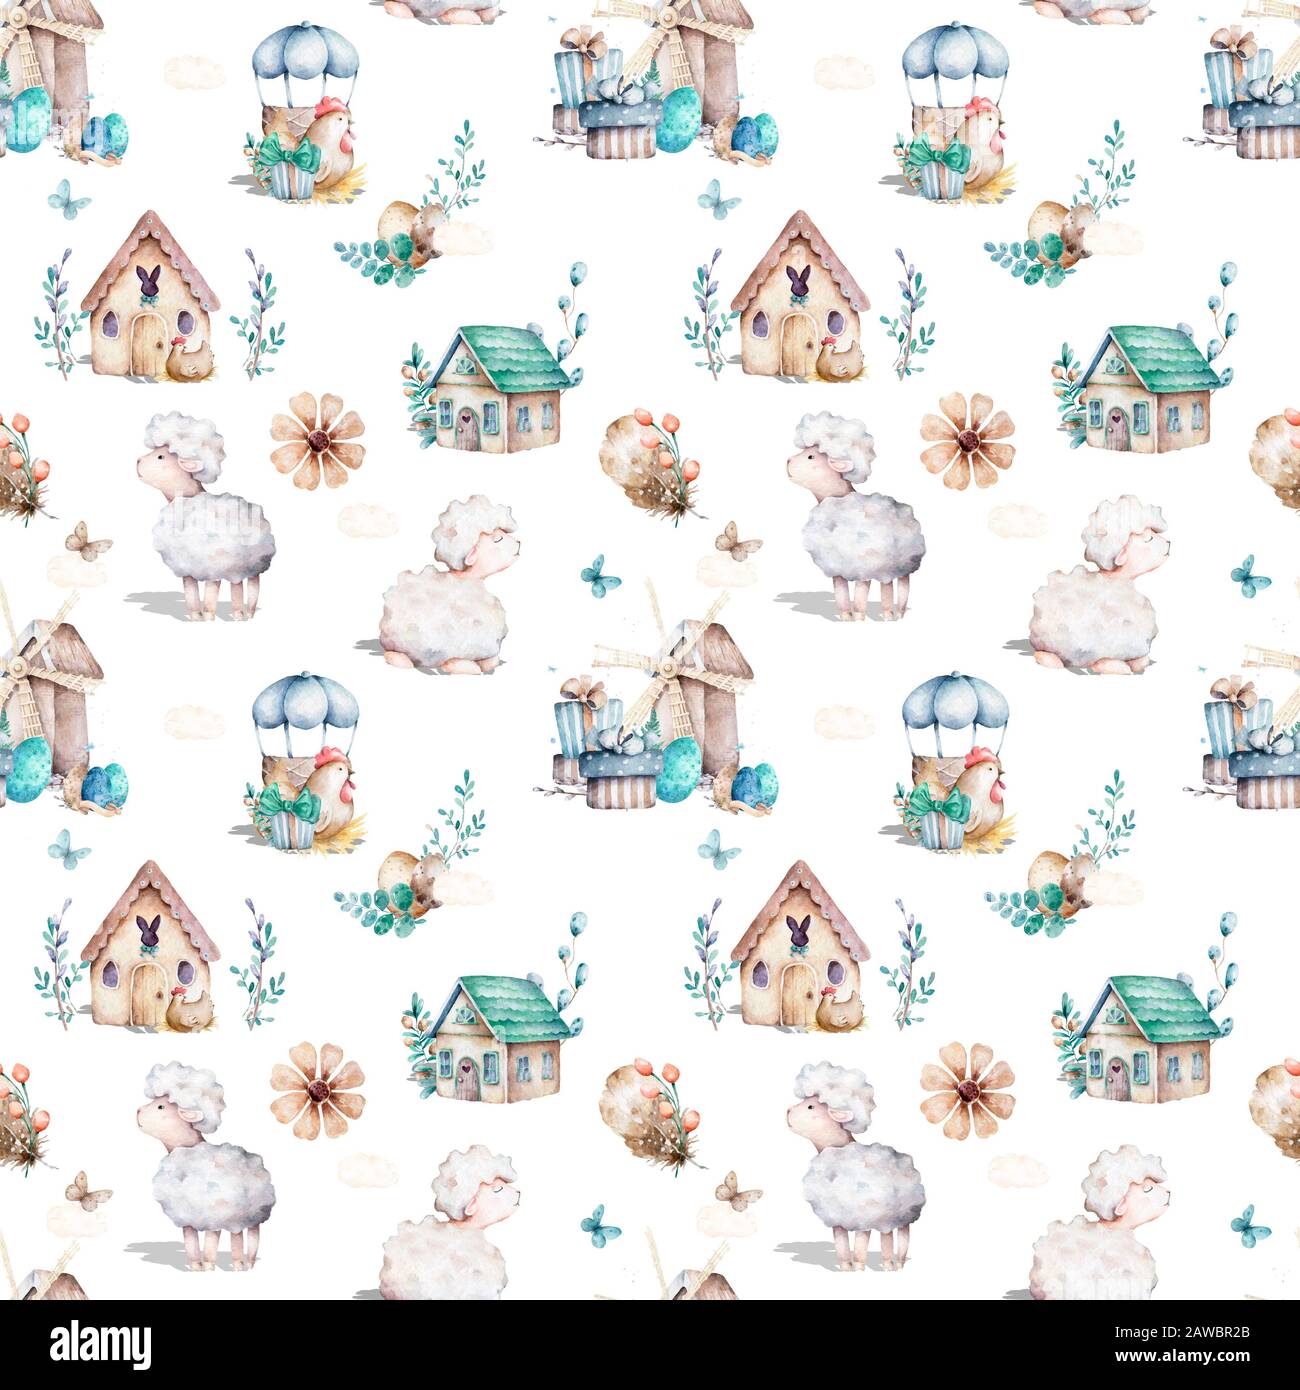 Cute baby sheep animal seamless pattern, farm illustration for children  clothing. Farm watercolor Hand drawn boho image for cases design, nursery  Stock Photo - Alamy